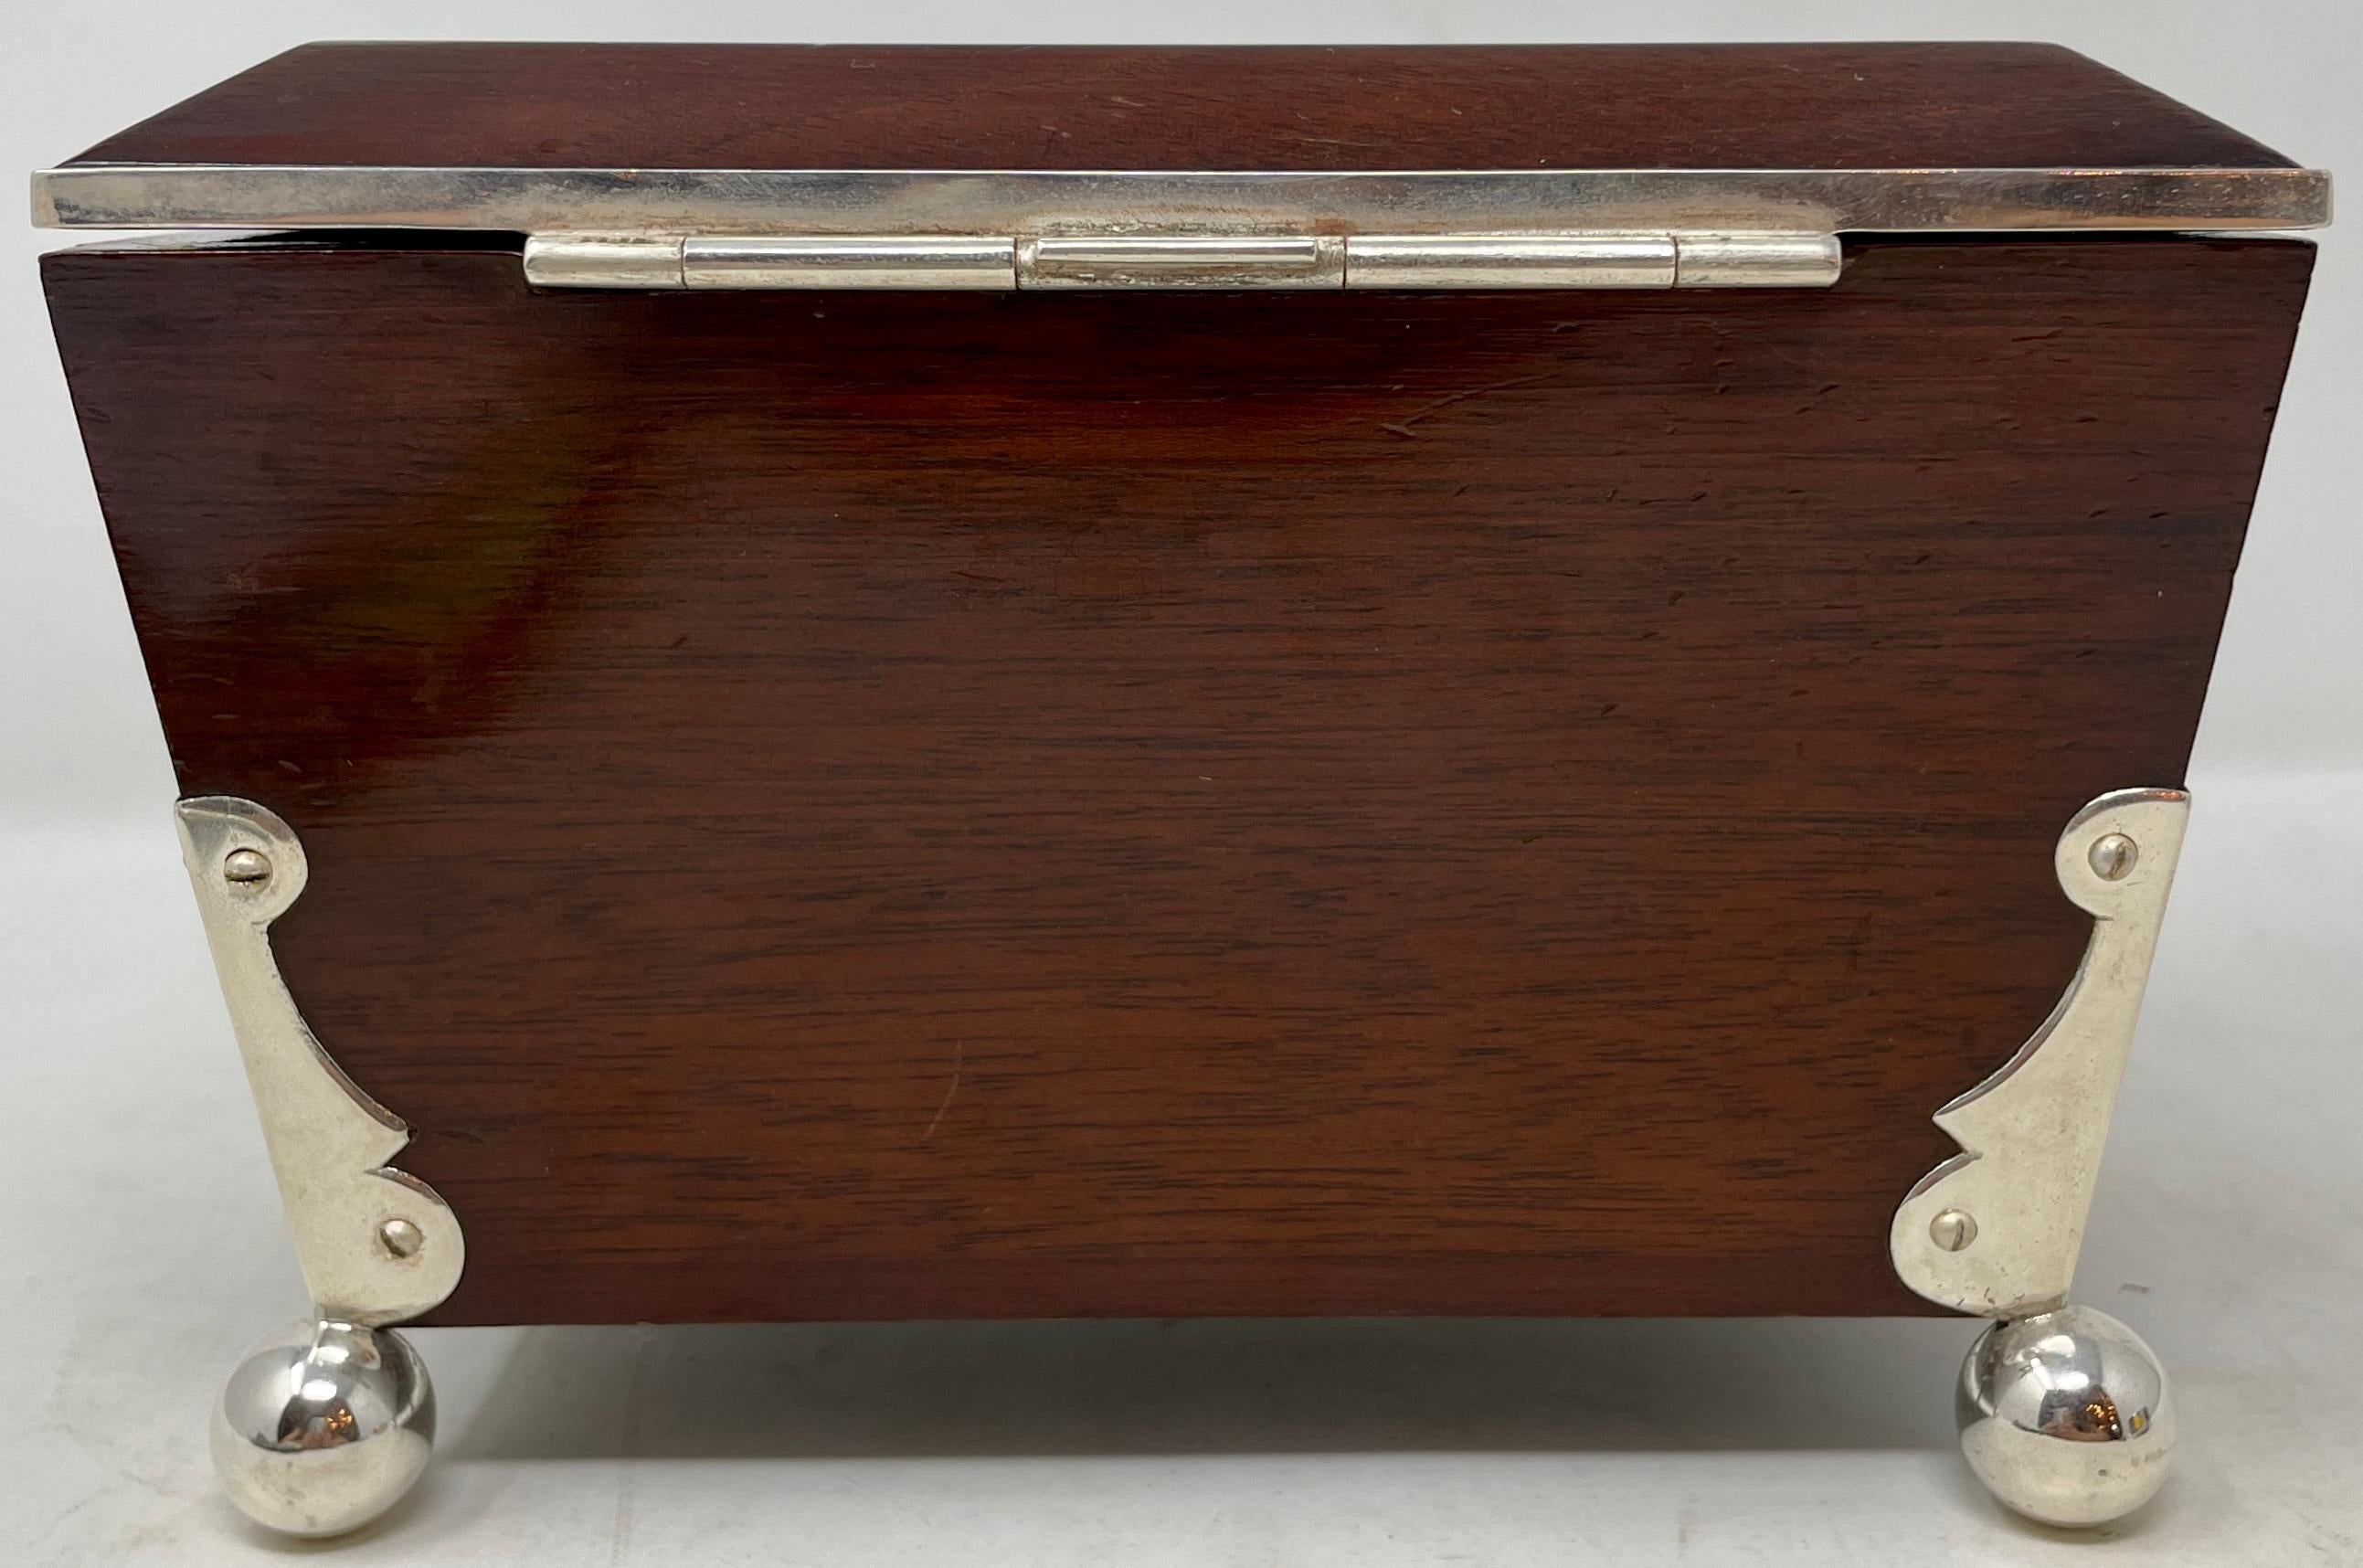 Silver Plate Antique English Victorian Mahogany Tea Caddy with Silver-Plated Mounts, Ca 1890